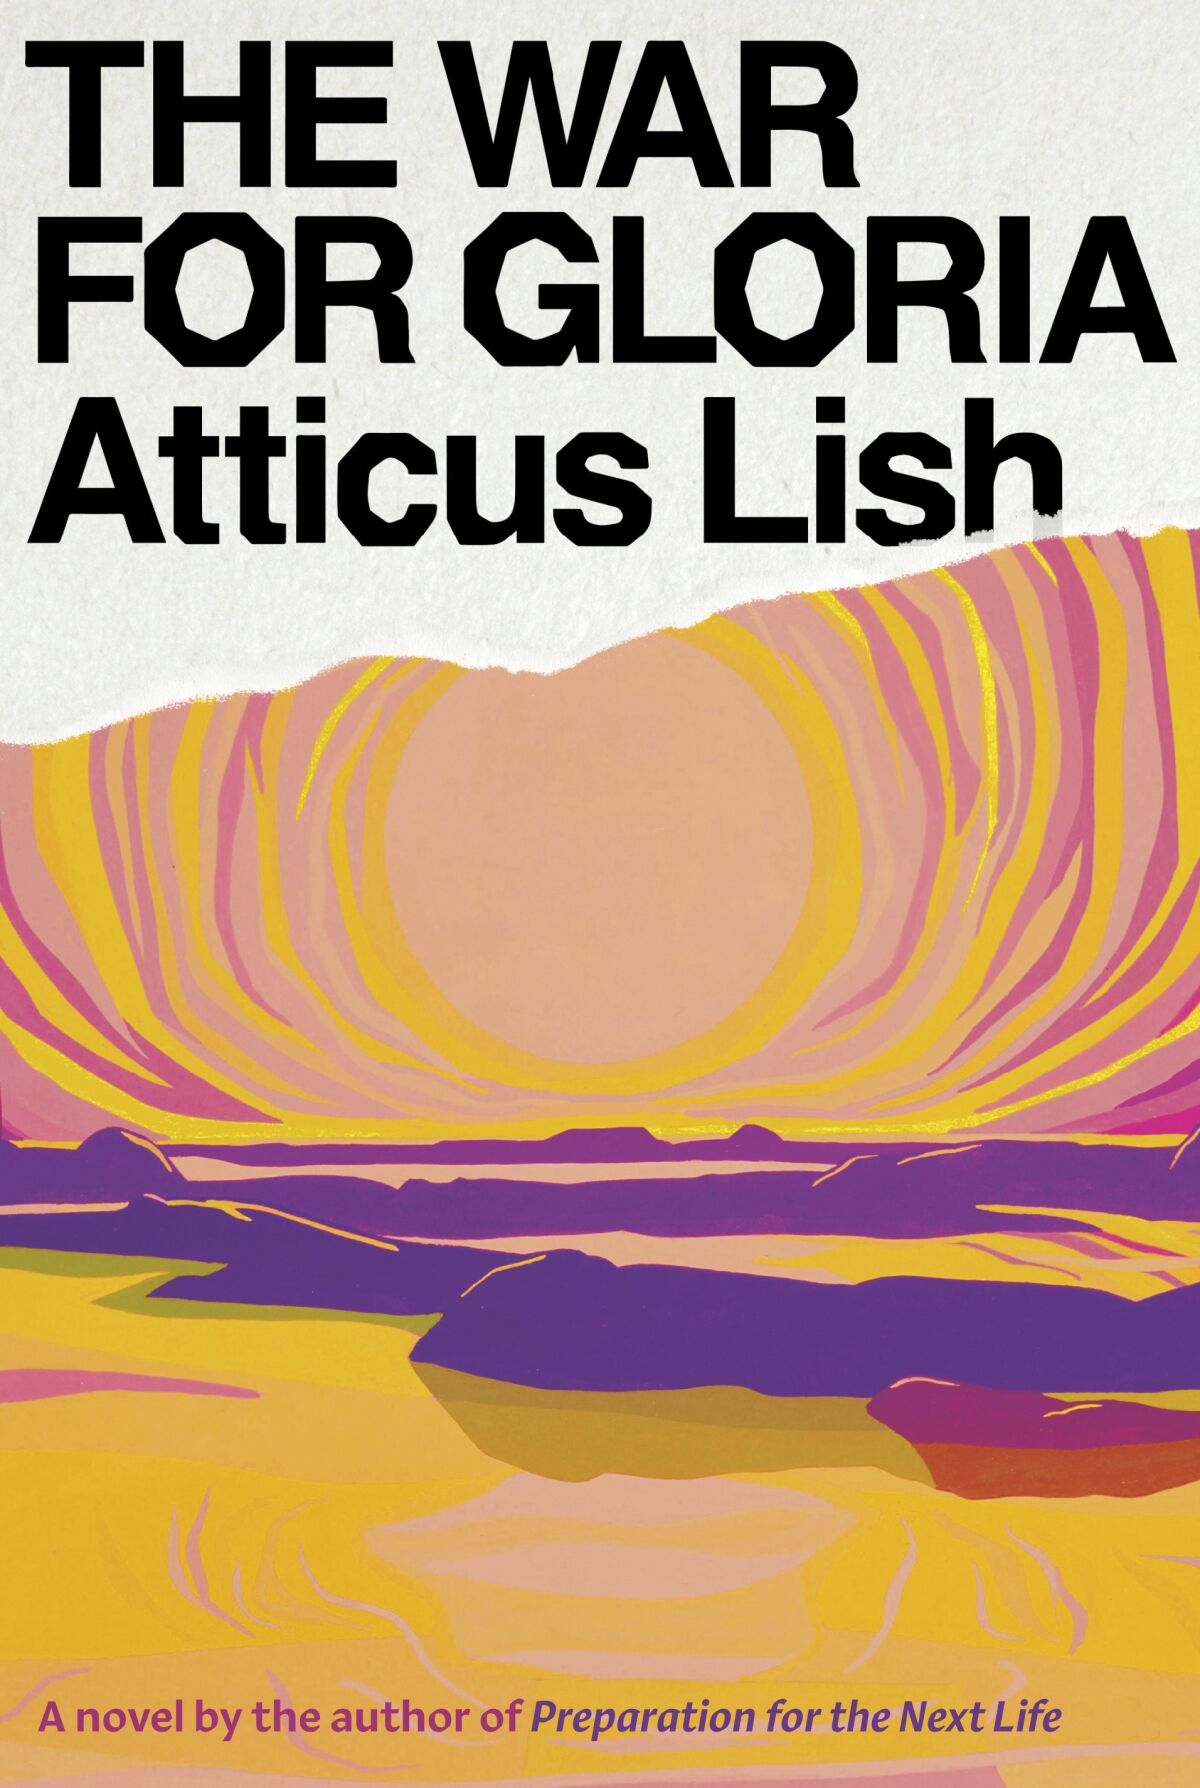 This cover image released by Knopf shows "The War for Gloria" by Atticus Lish. (Knopf via AP)